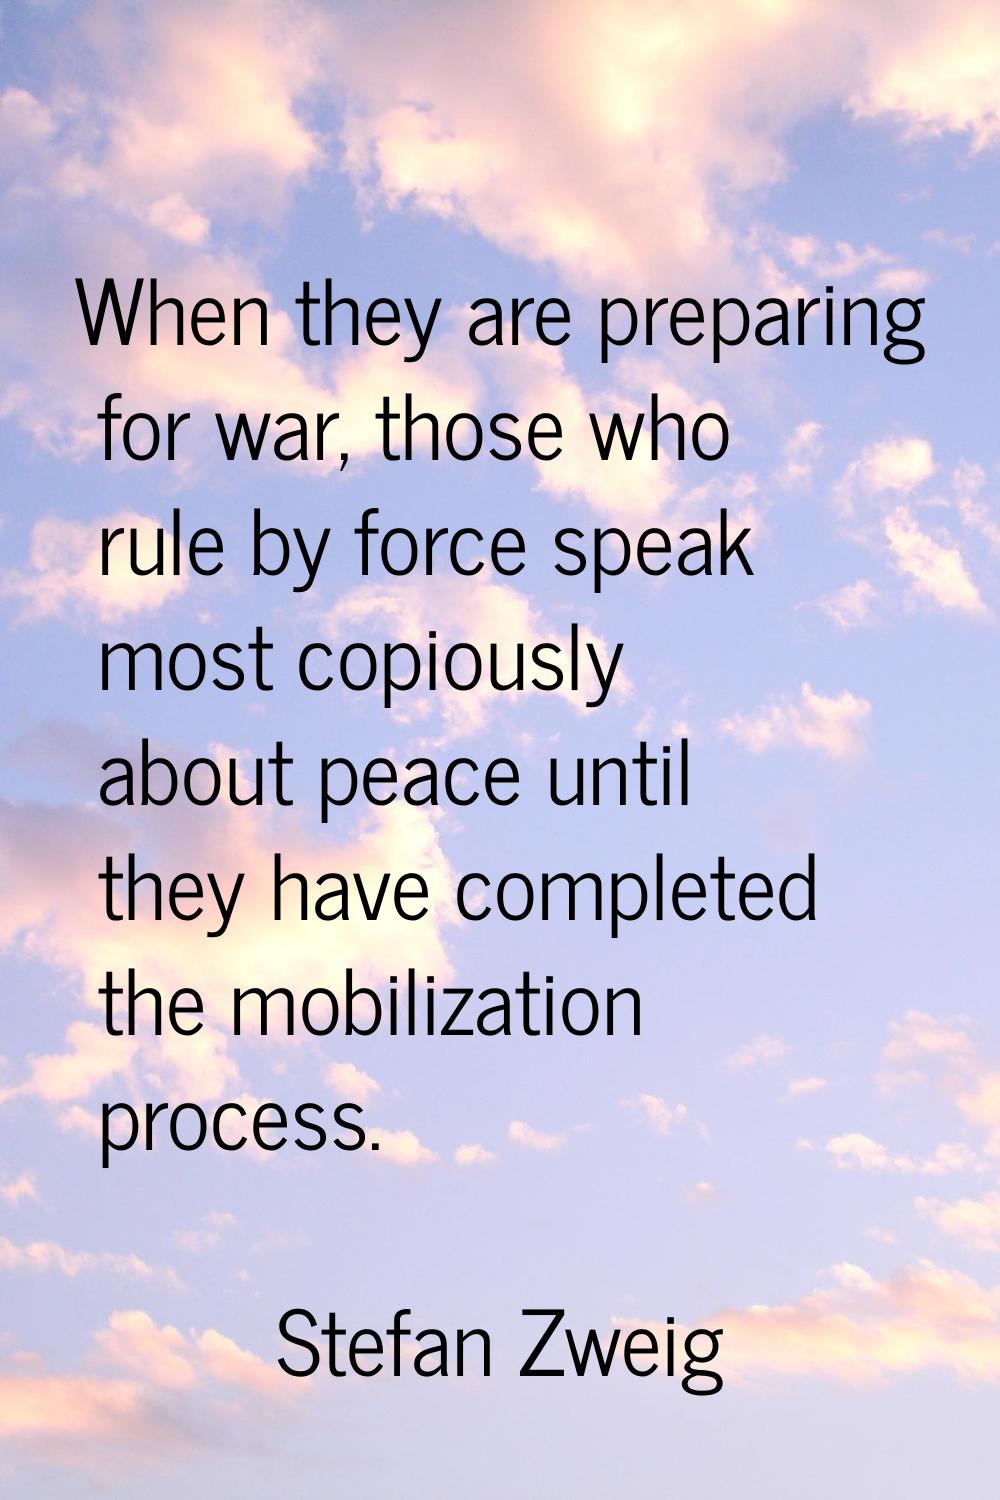 When they are preparing for war, those who rule by force speak most copiously about peace until the